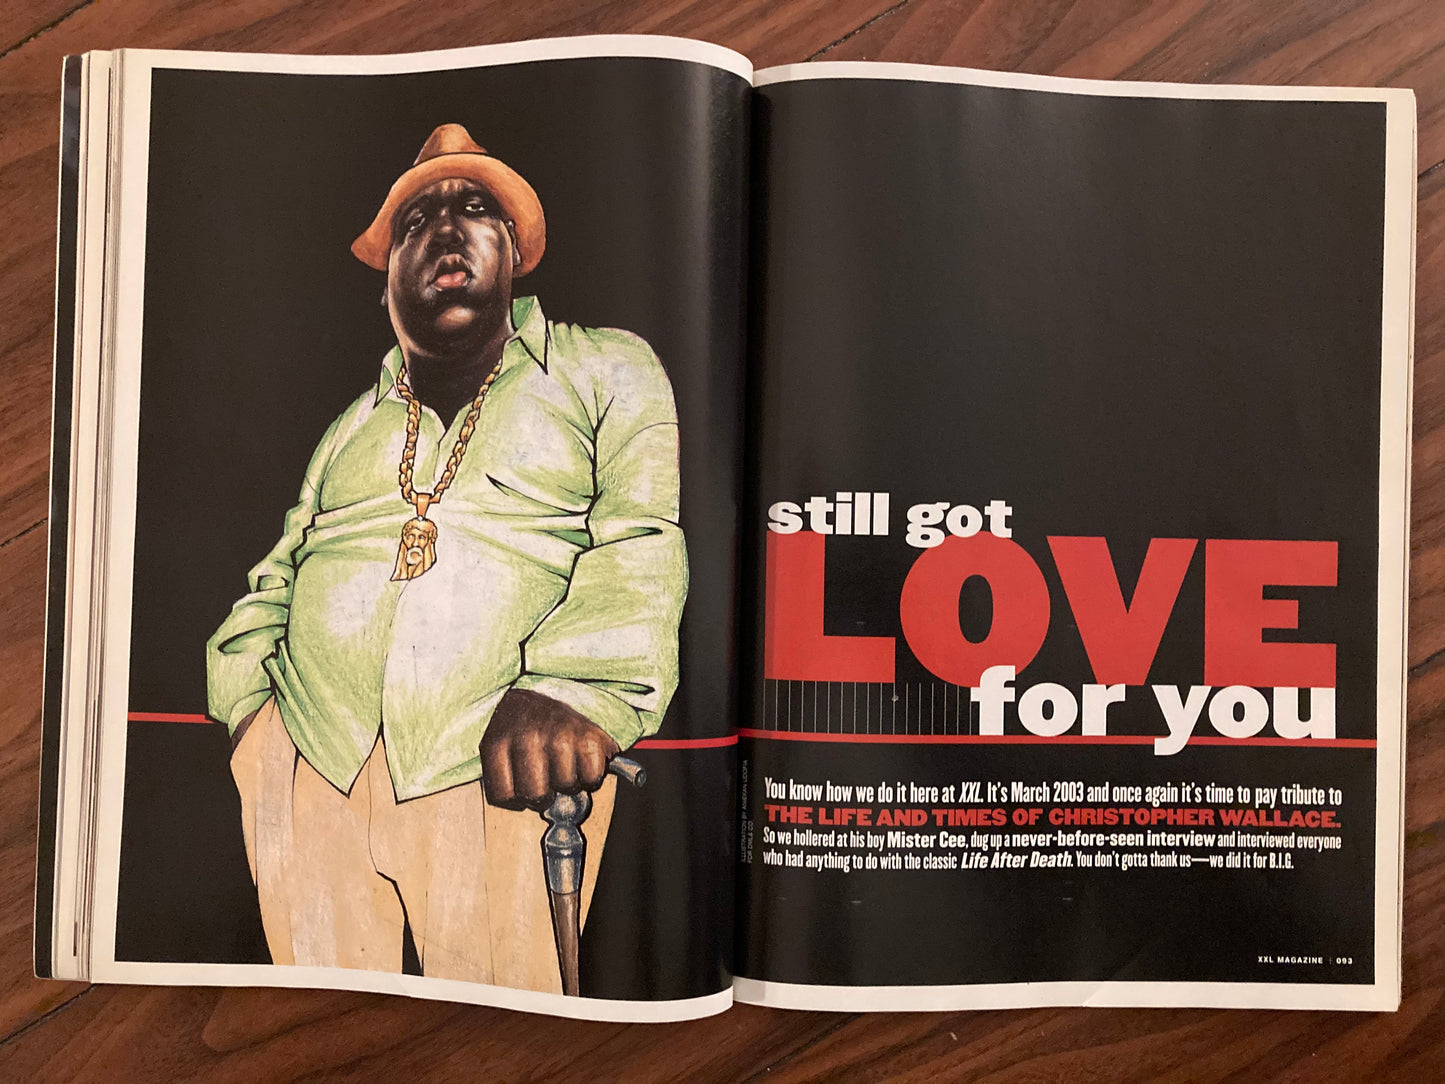 Magazines - Notorious B.I.G. - Biggie Smalls The True Story - Digital  Library of Illinois - OverDrive